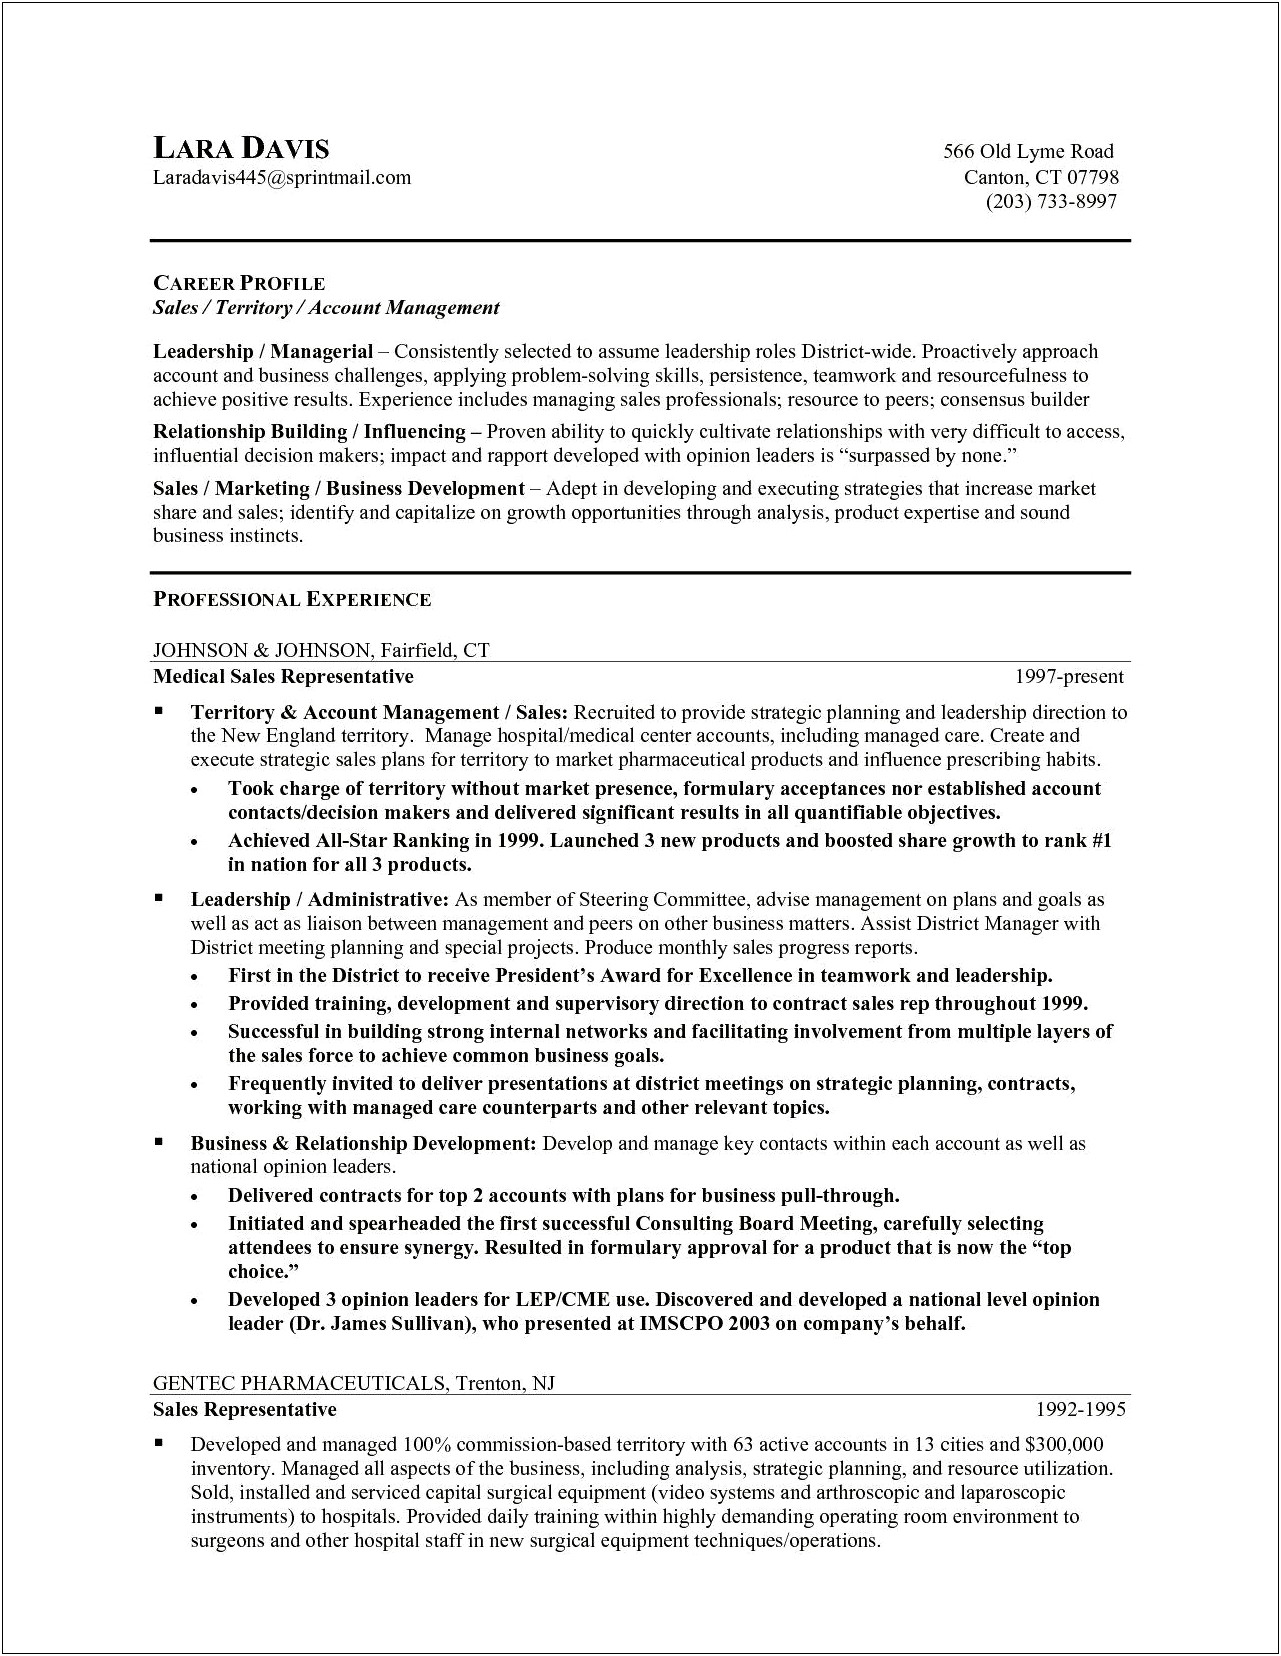 Customer Service Sales Resume Objective Examples